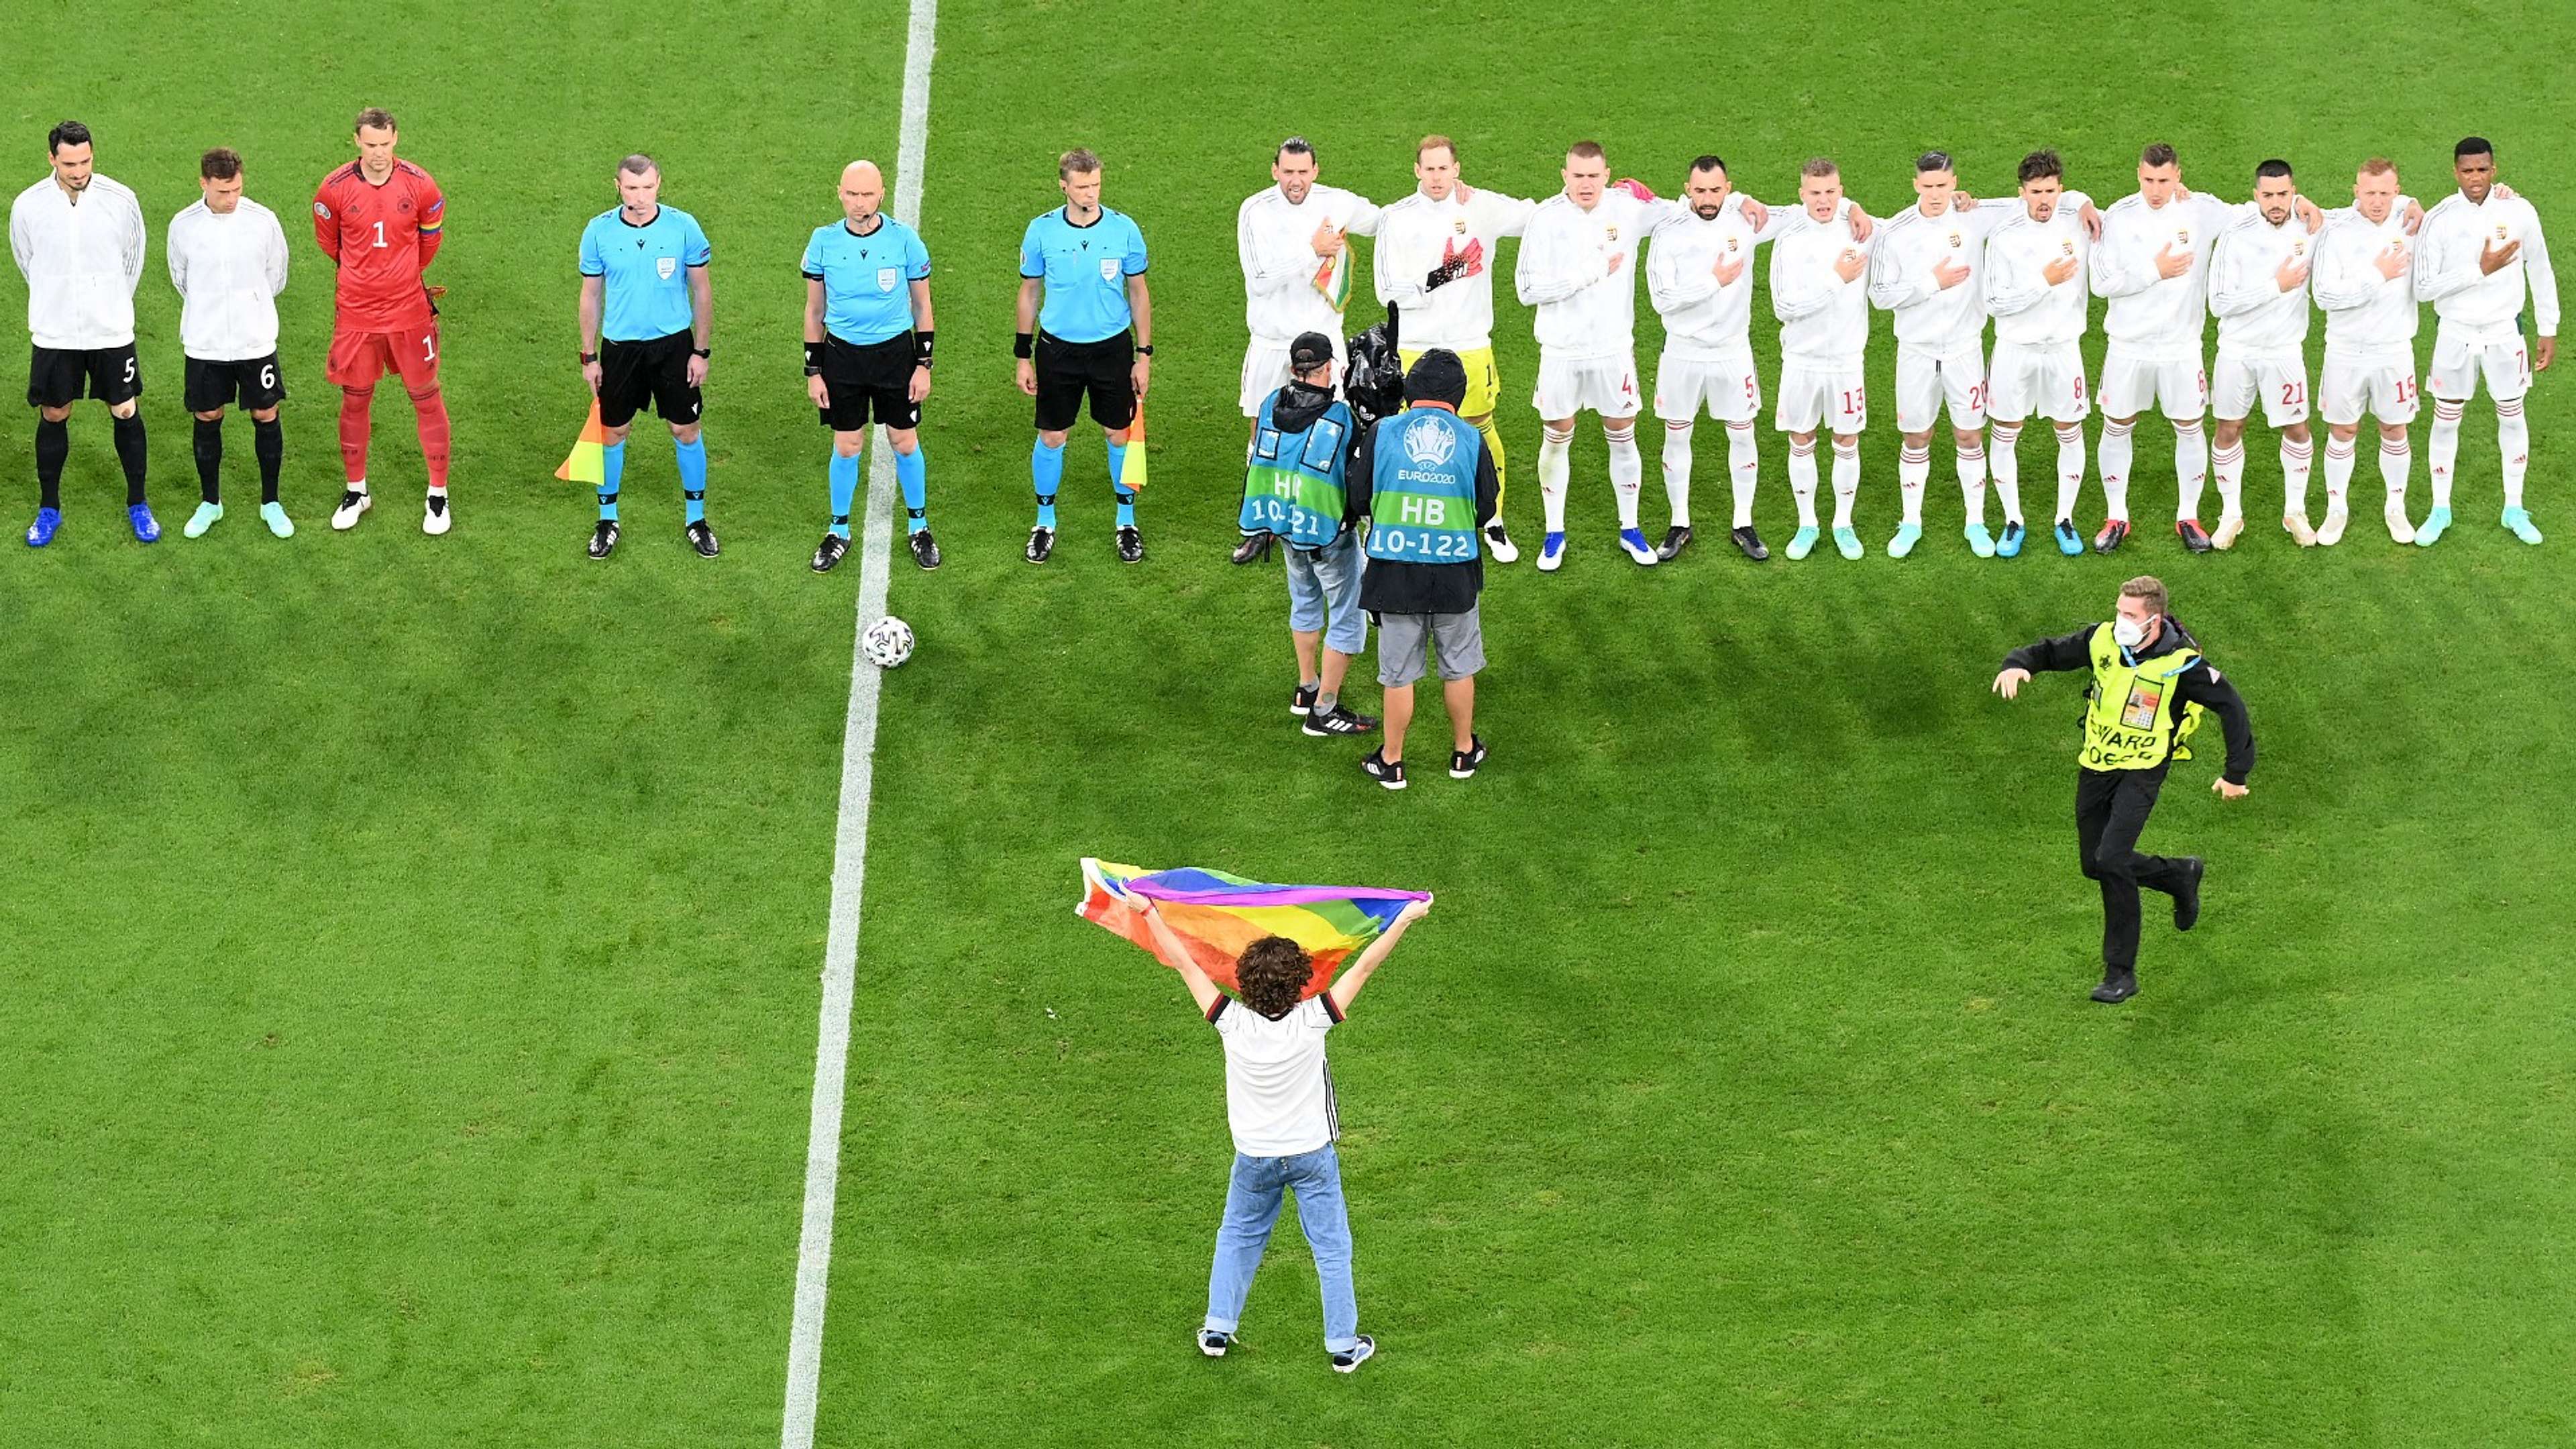 Germany Hungary pitch invader pride Euro 2020